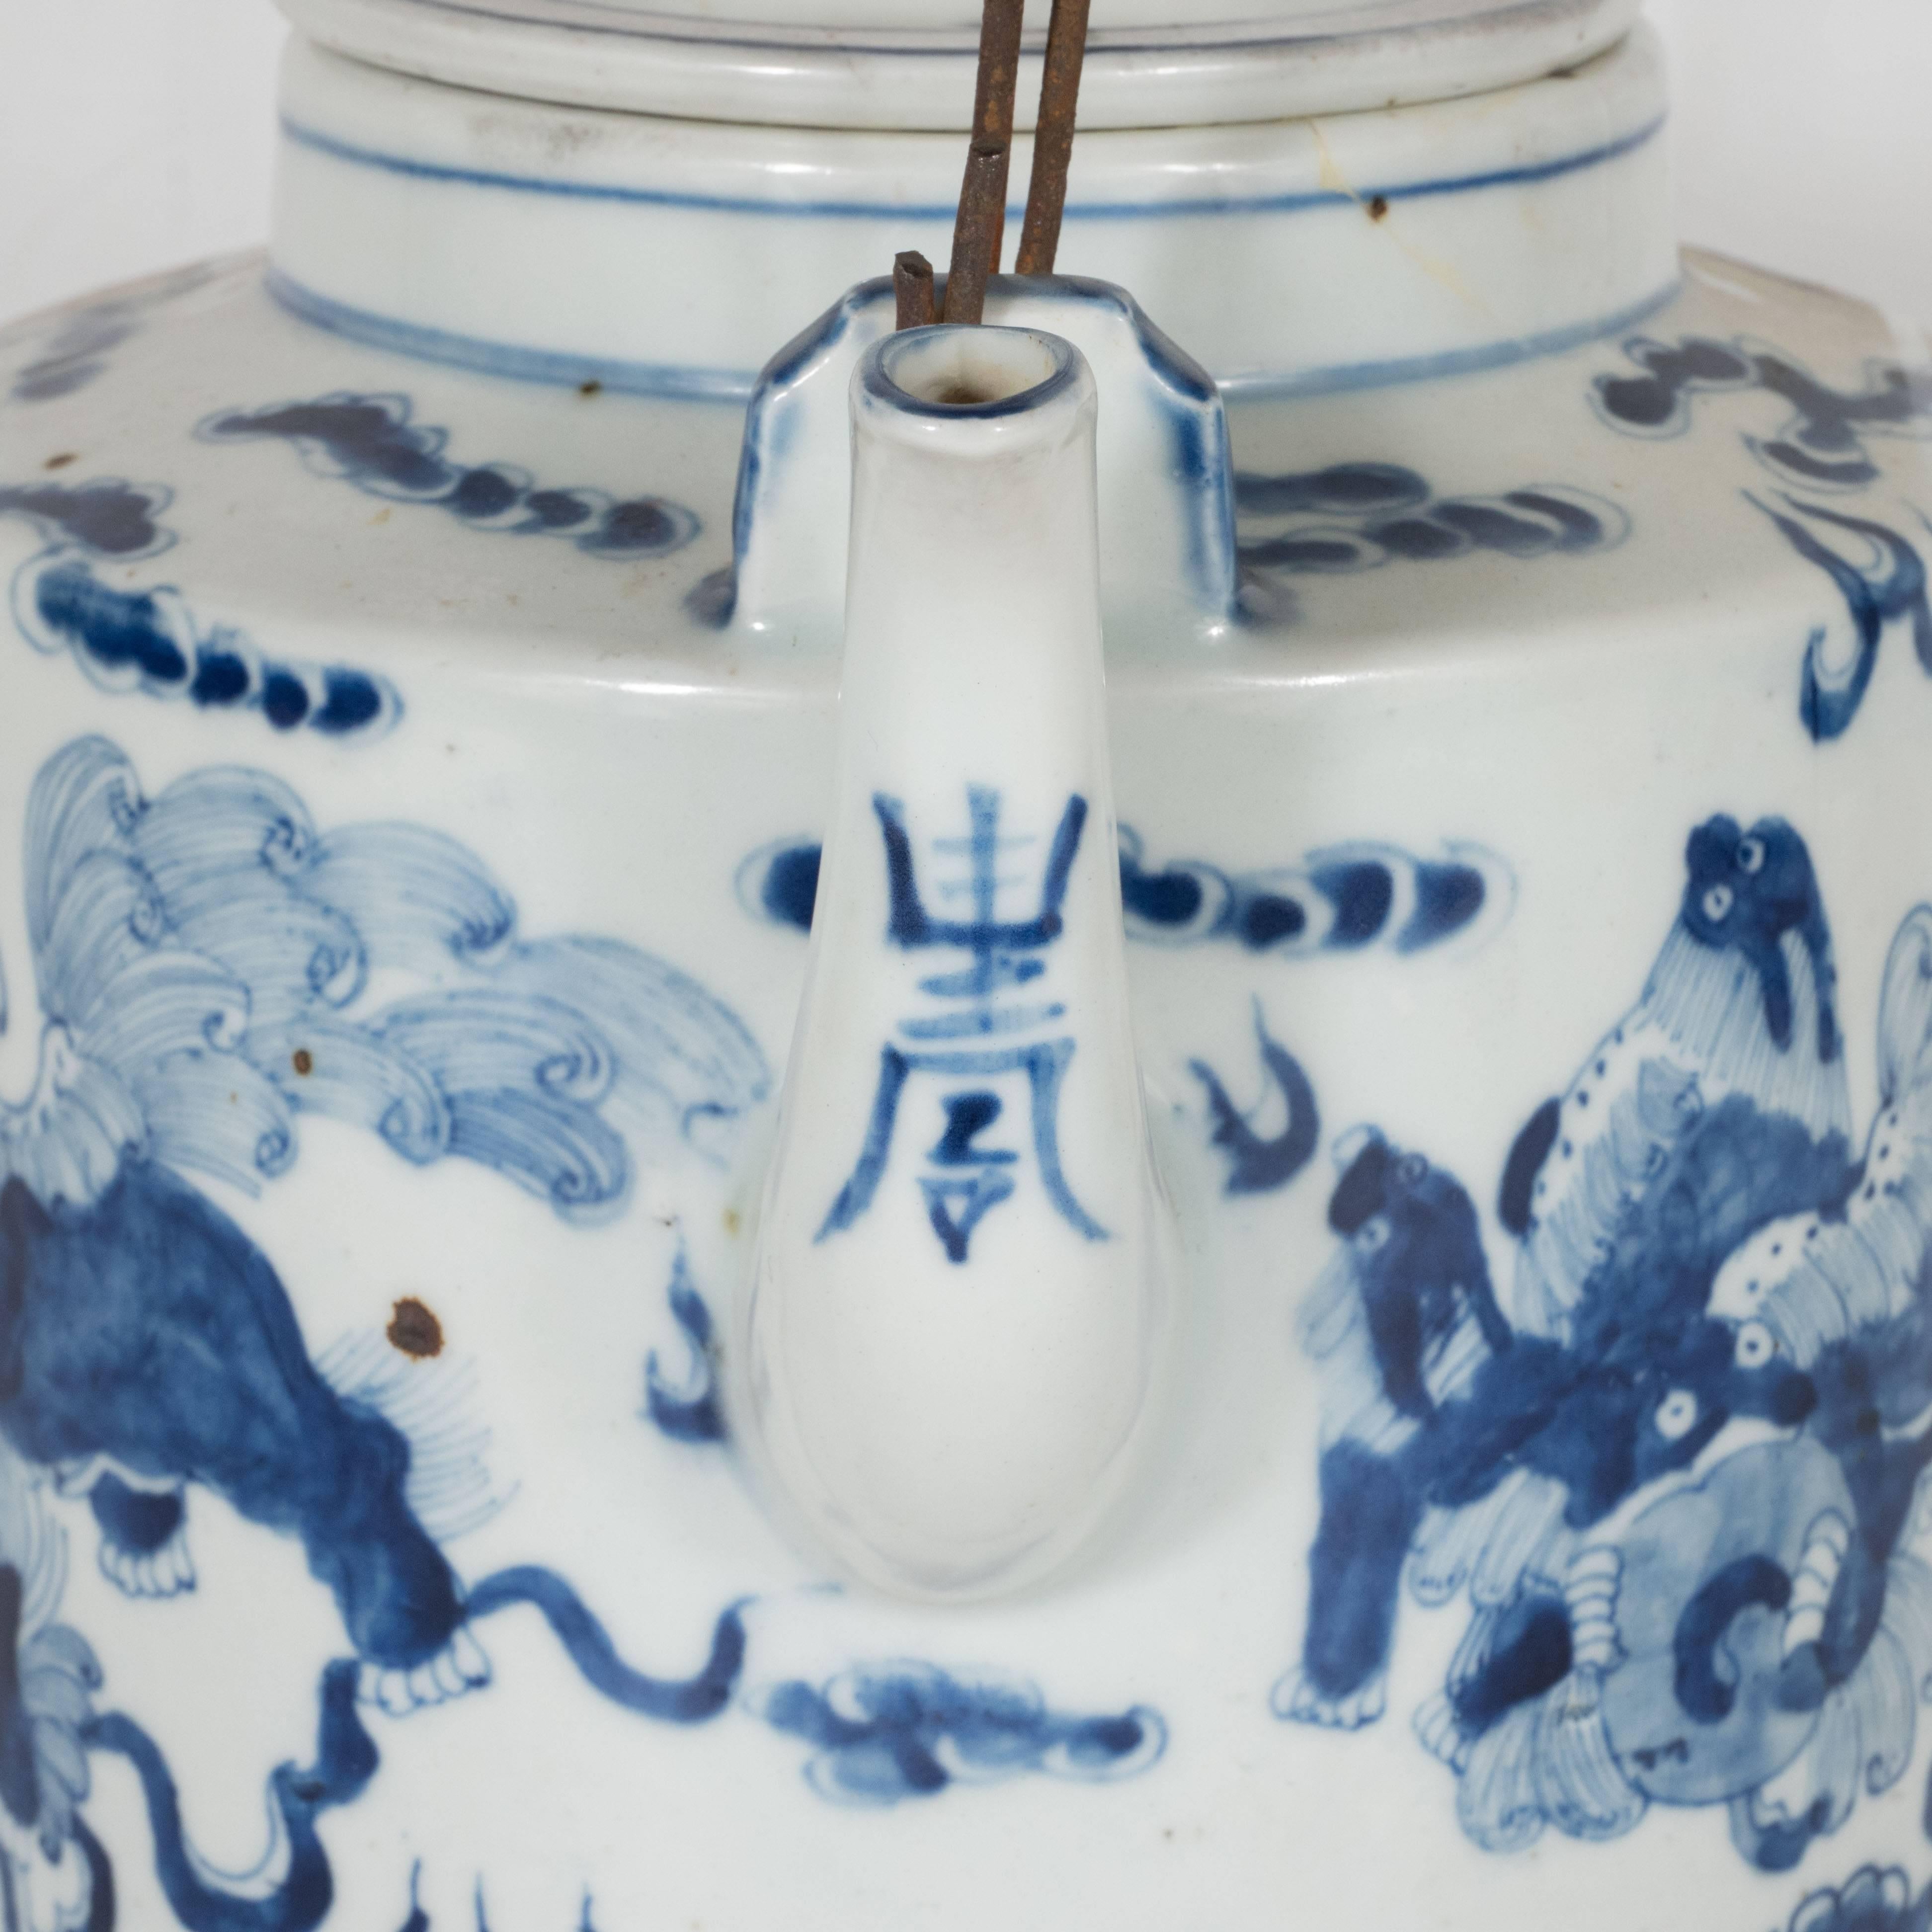 Pottery Exquisite Chinese Delft Tea Pot 19th Century with Temple Guardian Lions Motif